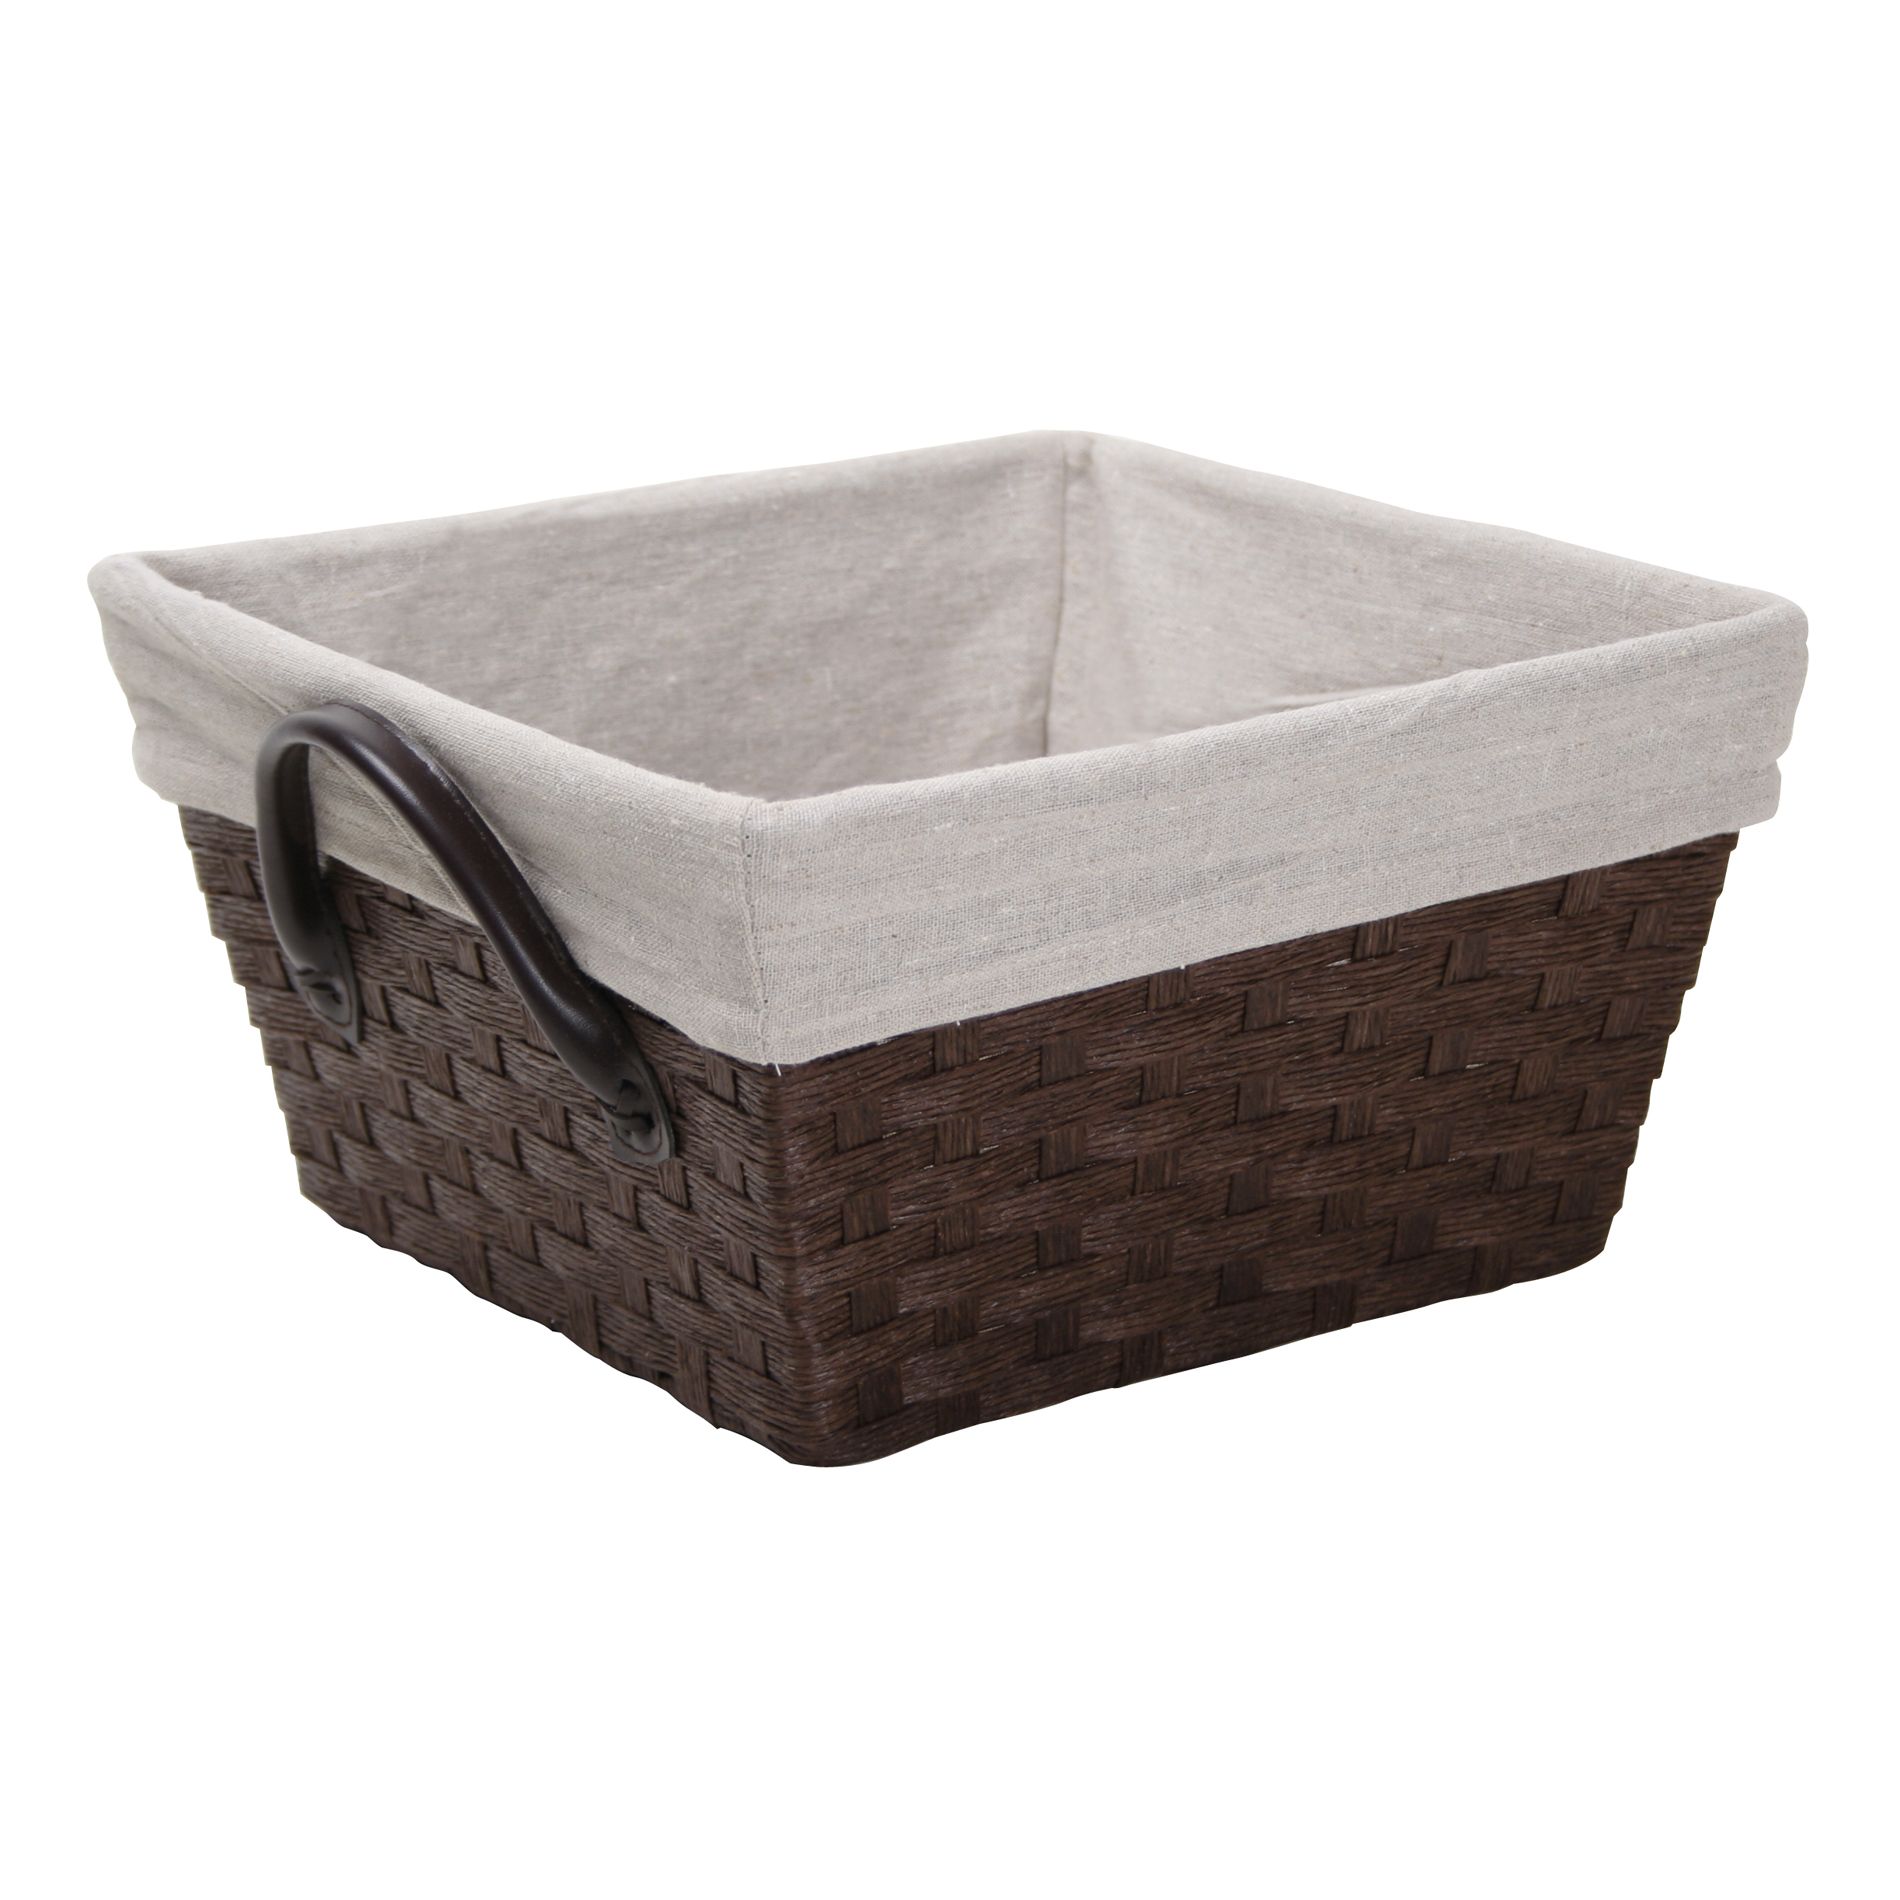 Small Woven Lined Basket: Classic Style of Storage for ...